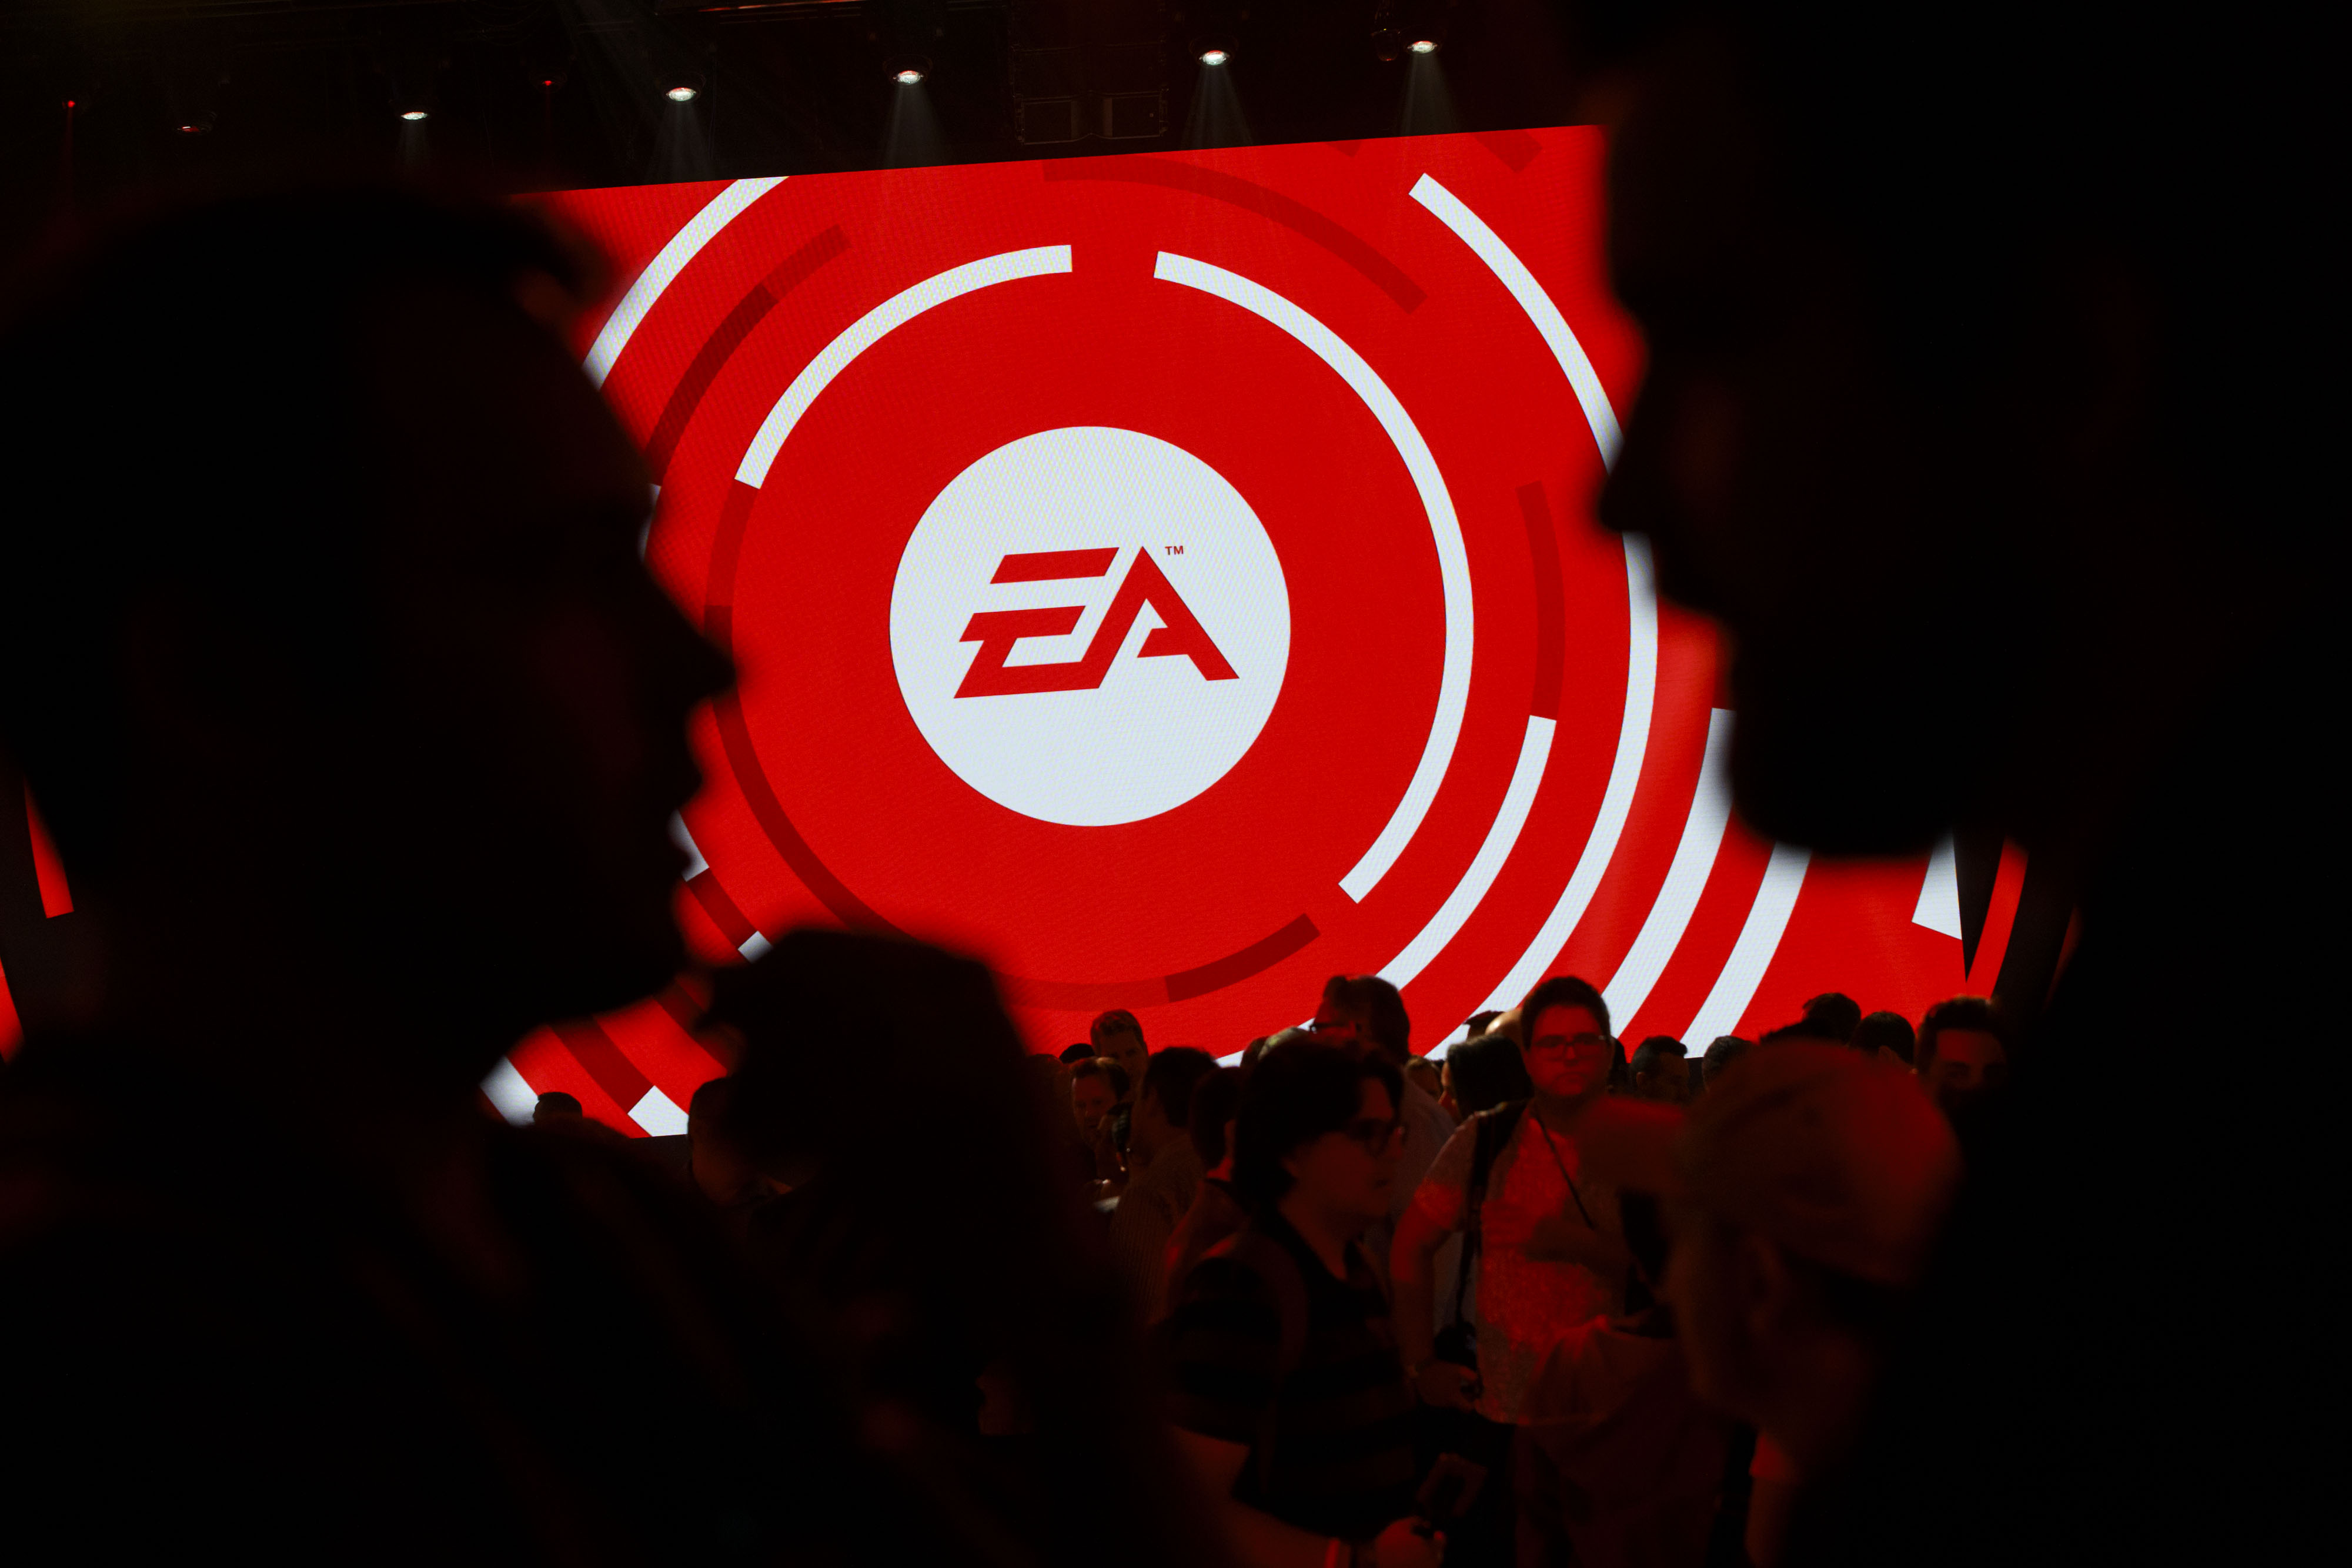 EA PLAY 2019: It's All About the Games